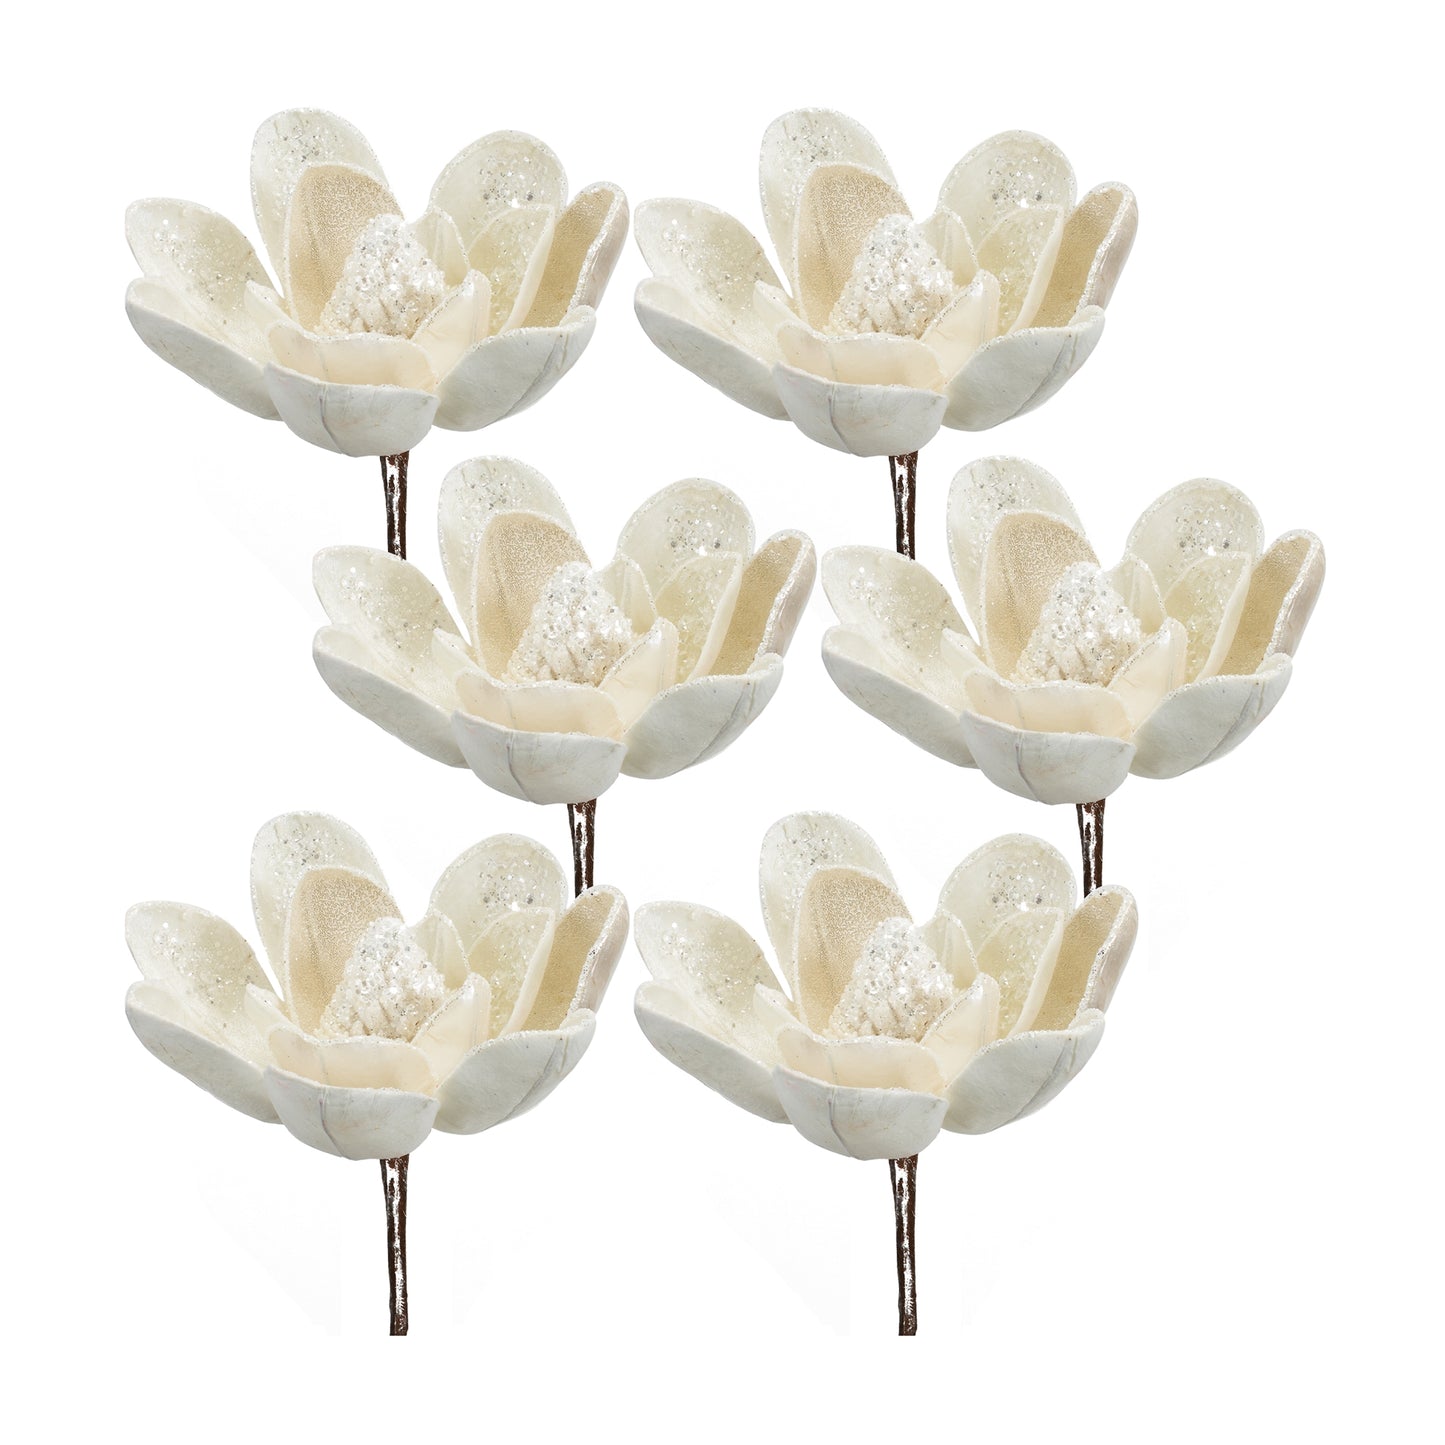 Ivory Velvet Magnolia Stem with Silver Bead Accents (Set of 6)